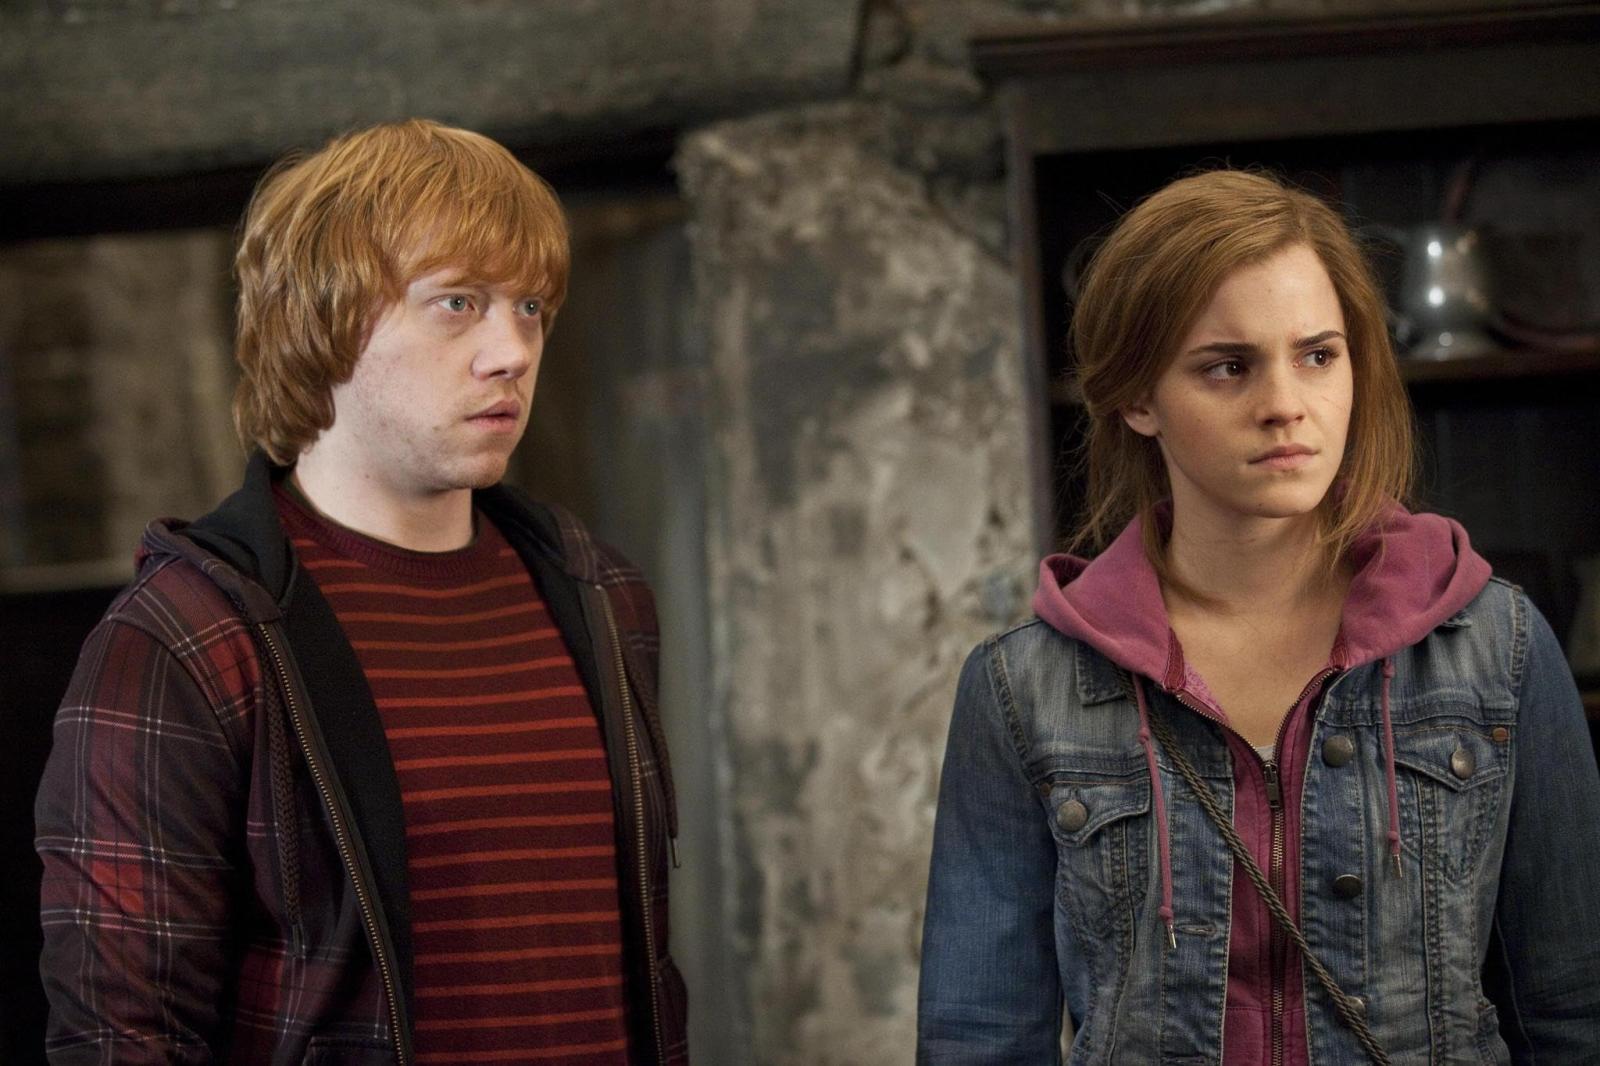 5 Unexpected Harry Potter Characters Fans Wanted Dead to Make Plot More Interesting - image 4